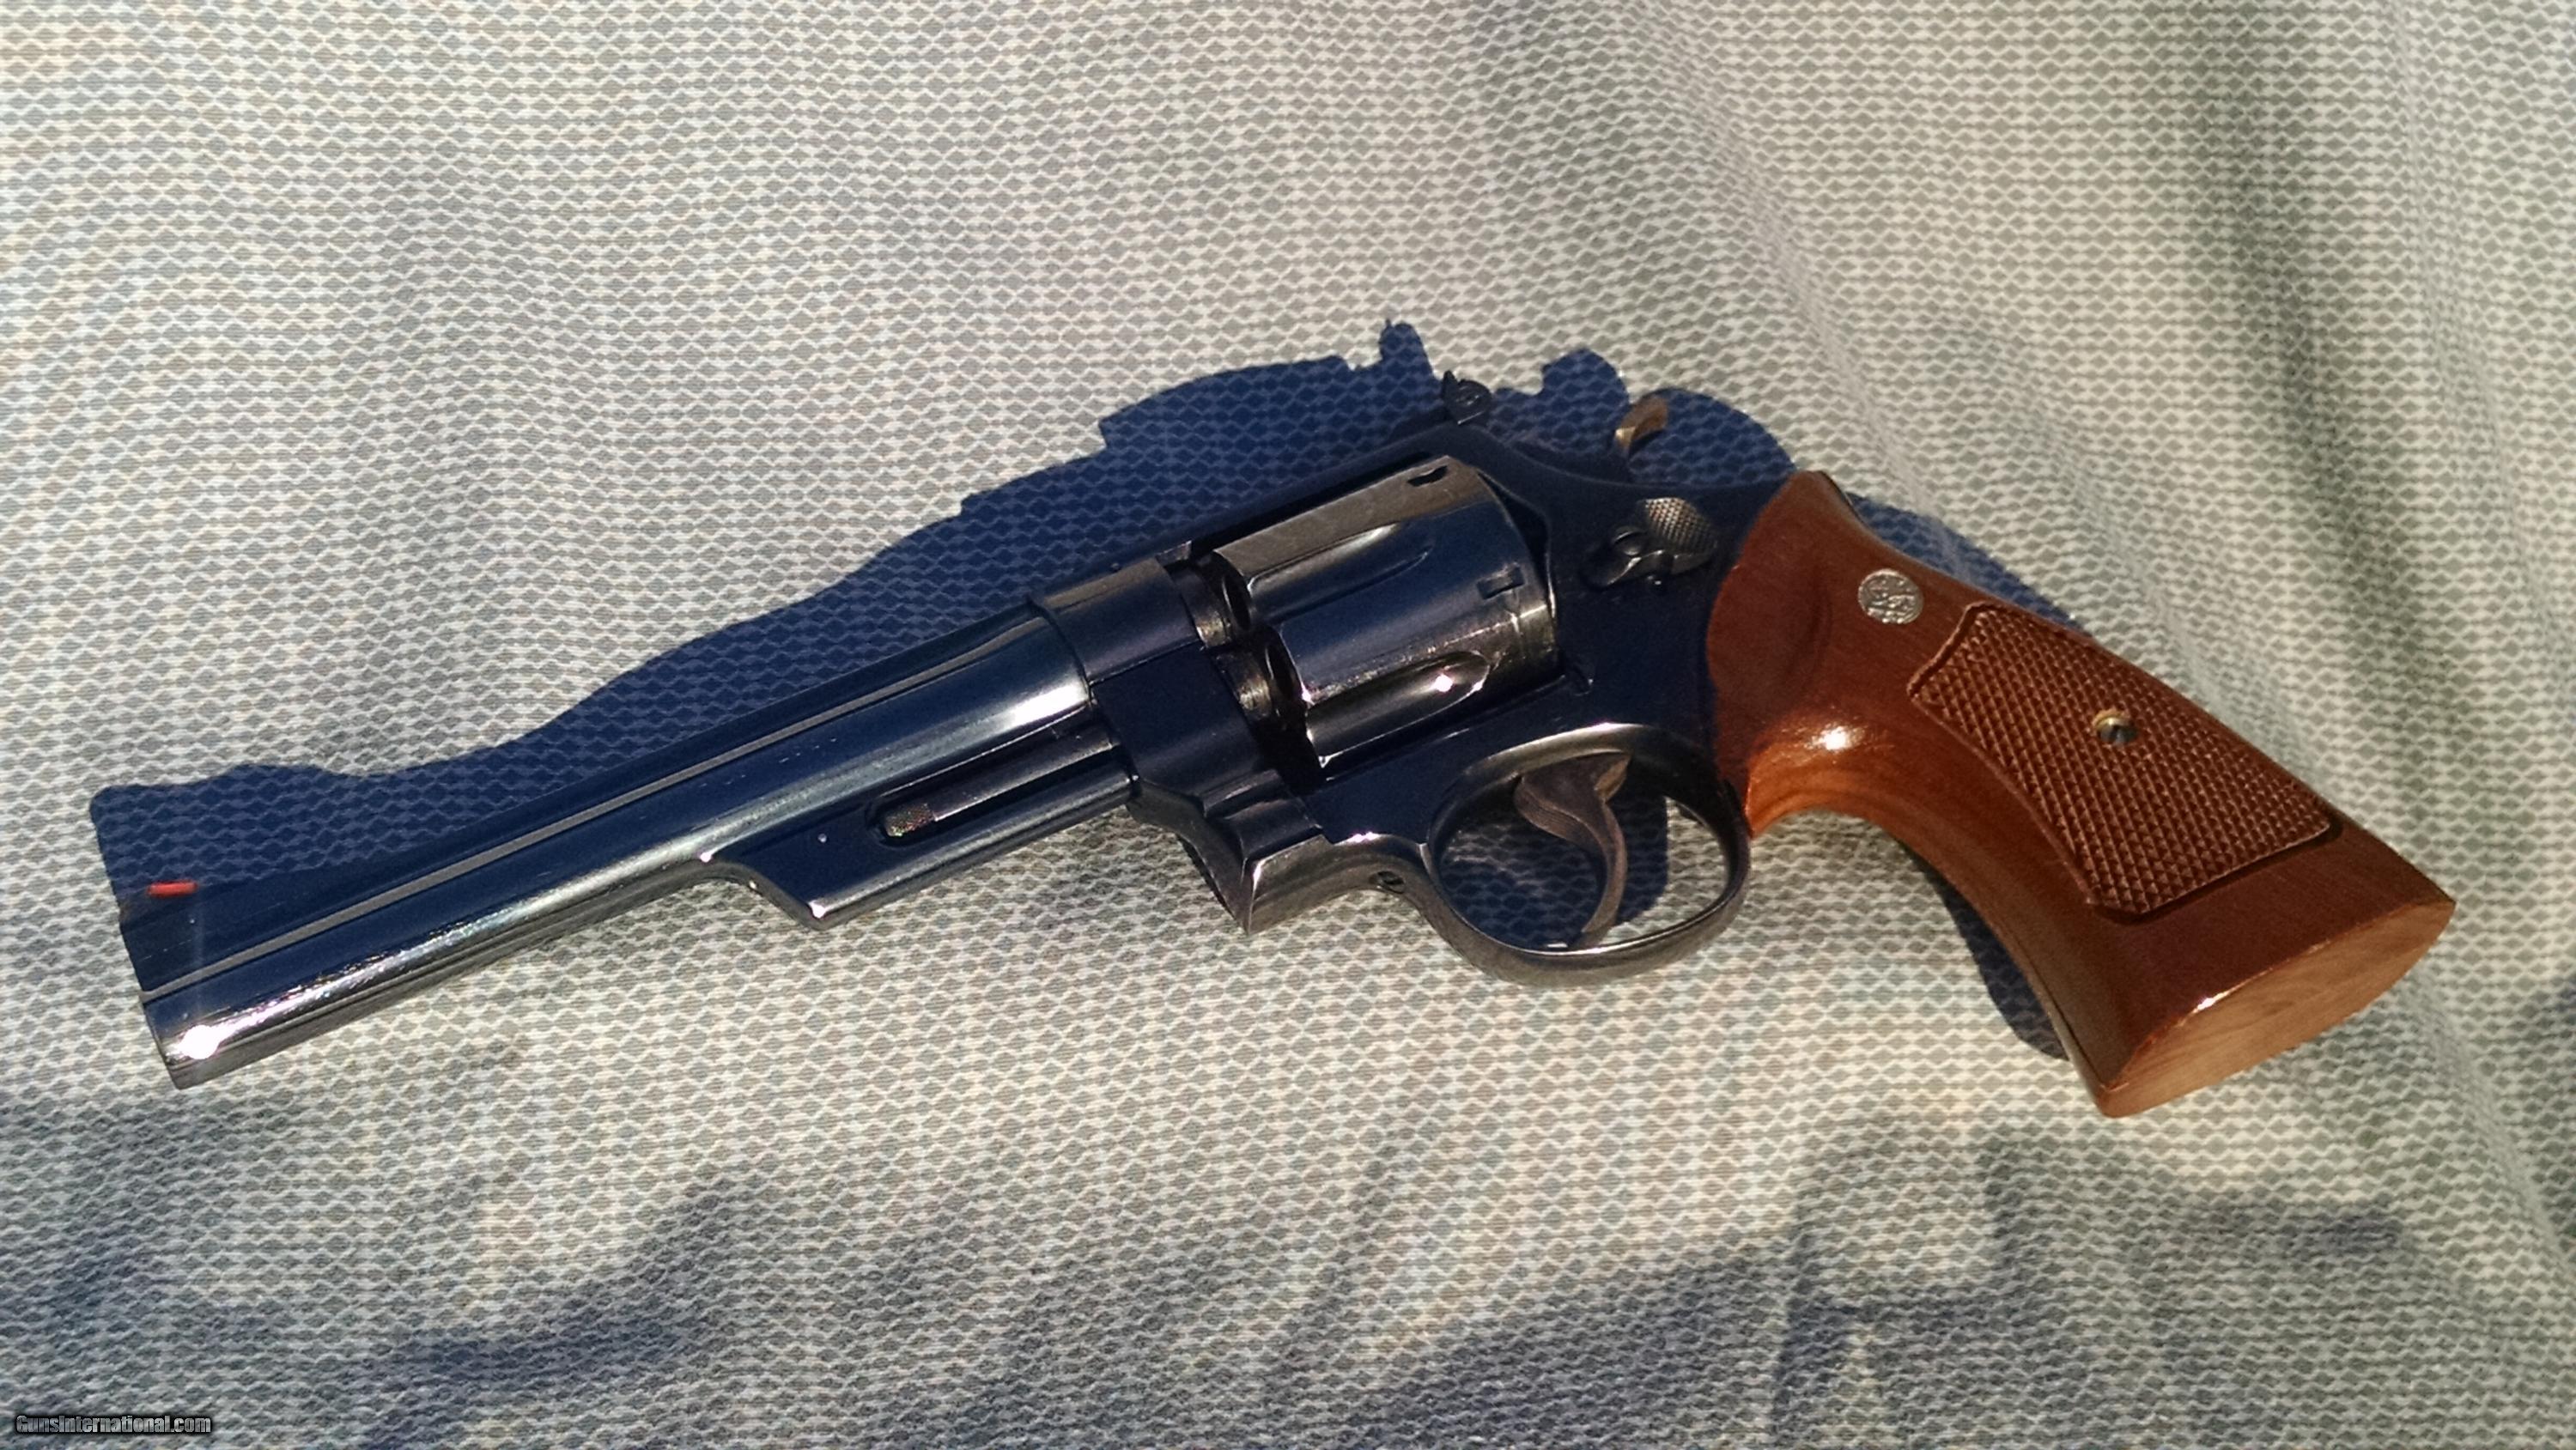 Smith & Wesson Model 27 2 357 Magnum With 6 Inch Barrel.